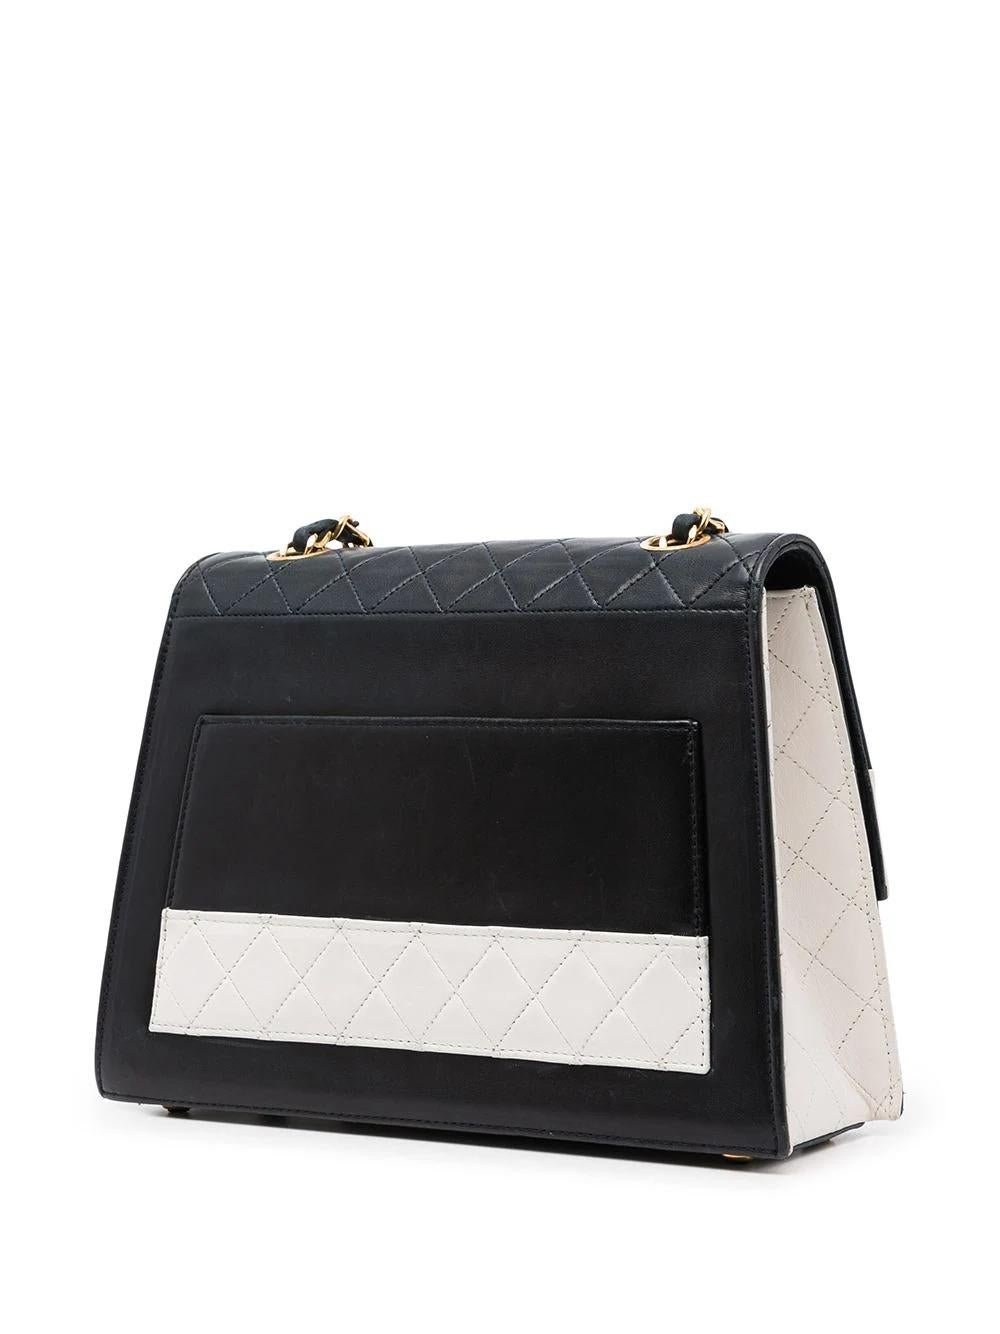 Women's Chanel 1989 Two Tone Black and White Vintage Flap Bag For Sale